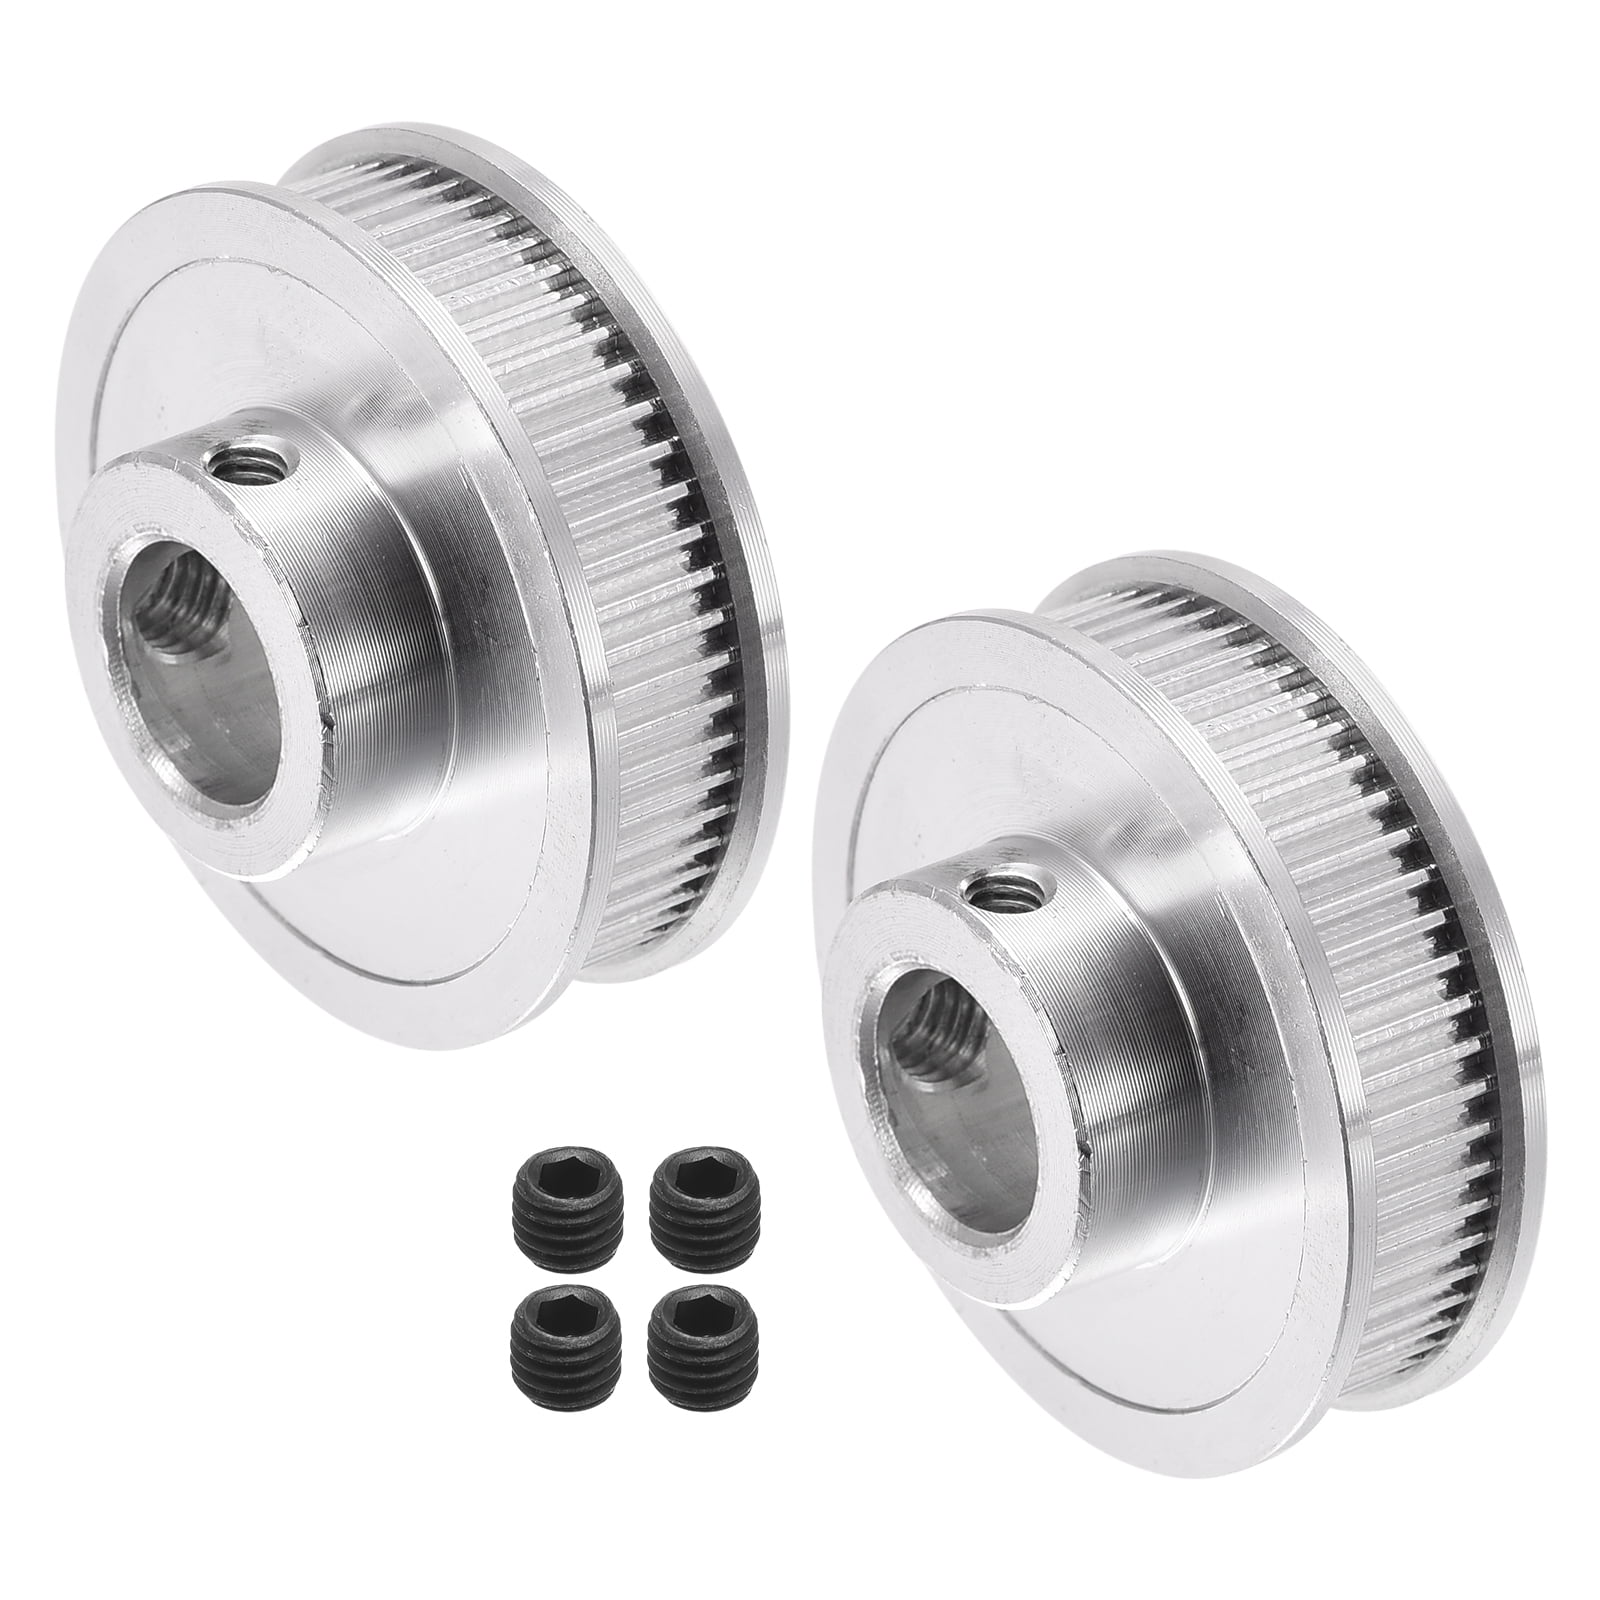 Timing Pulley Black/Silver Synchronous Wheel for Drive Belts Width 6/10mm 